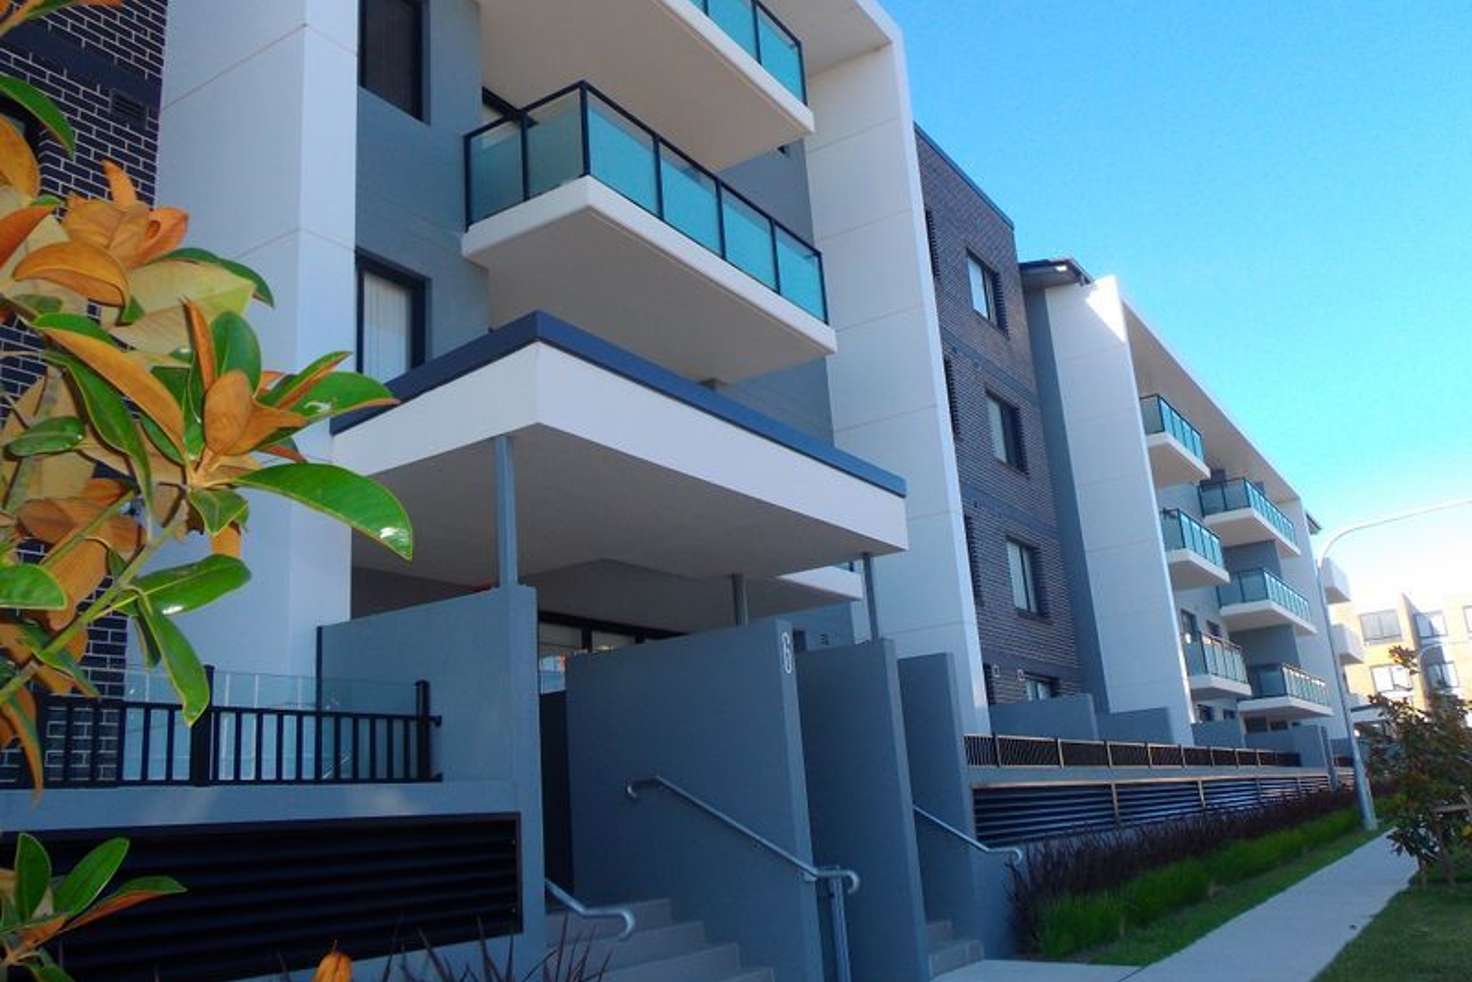 Main view of Homely apartment listing, 204/6-8 Sunbeam Street, Campsie NSW 2194